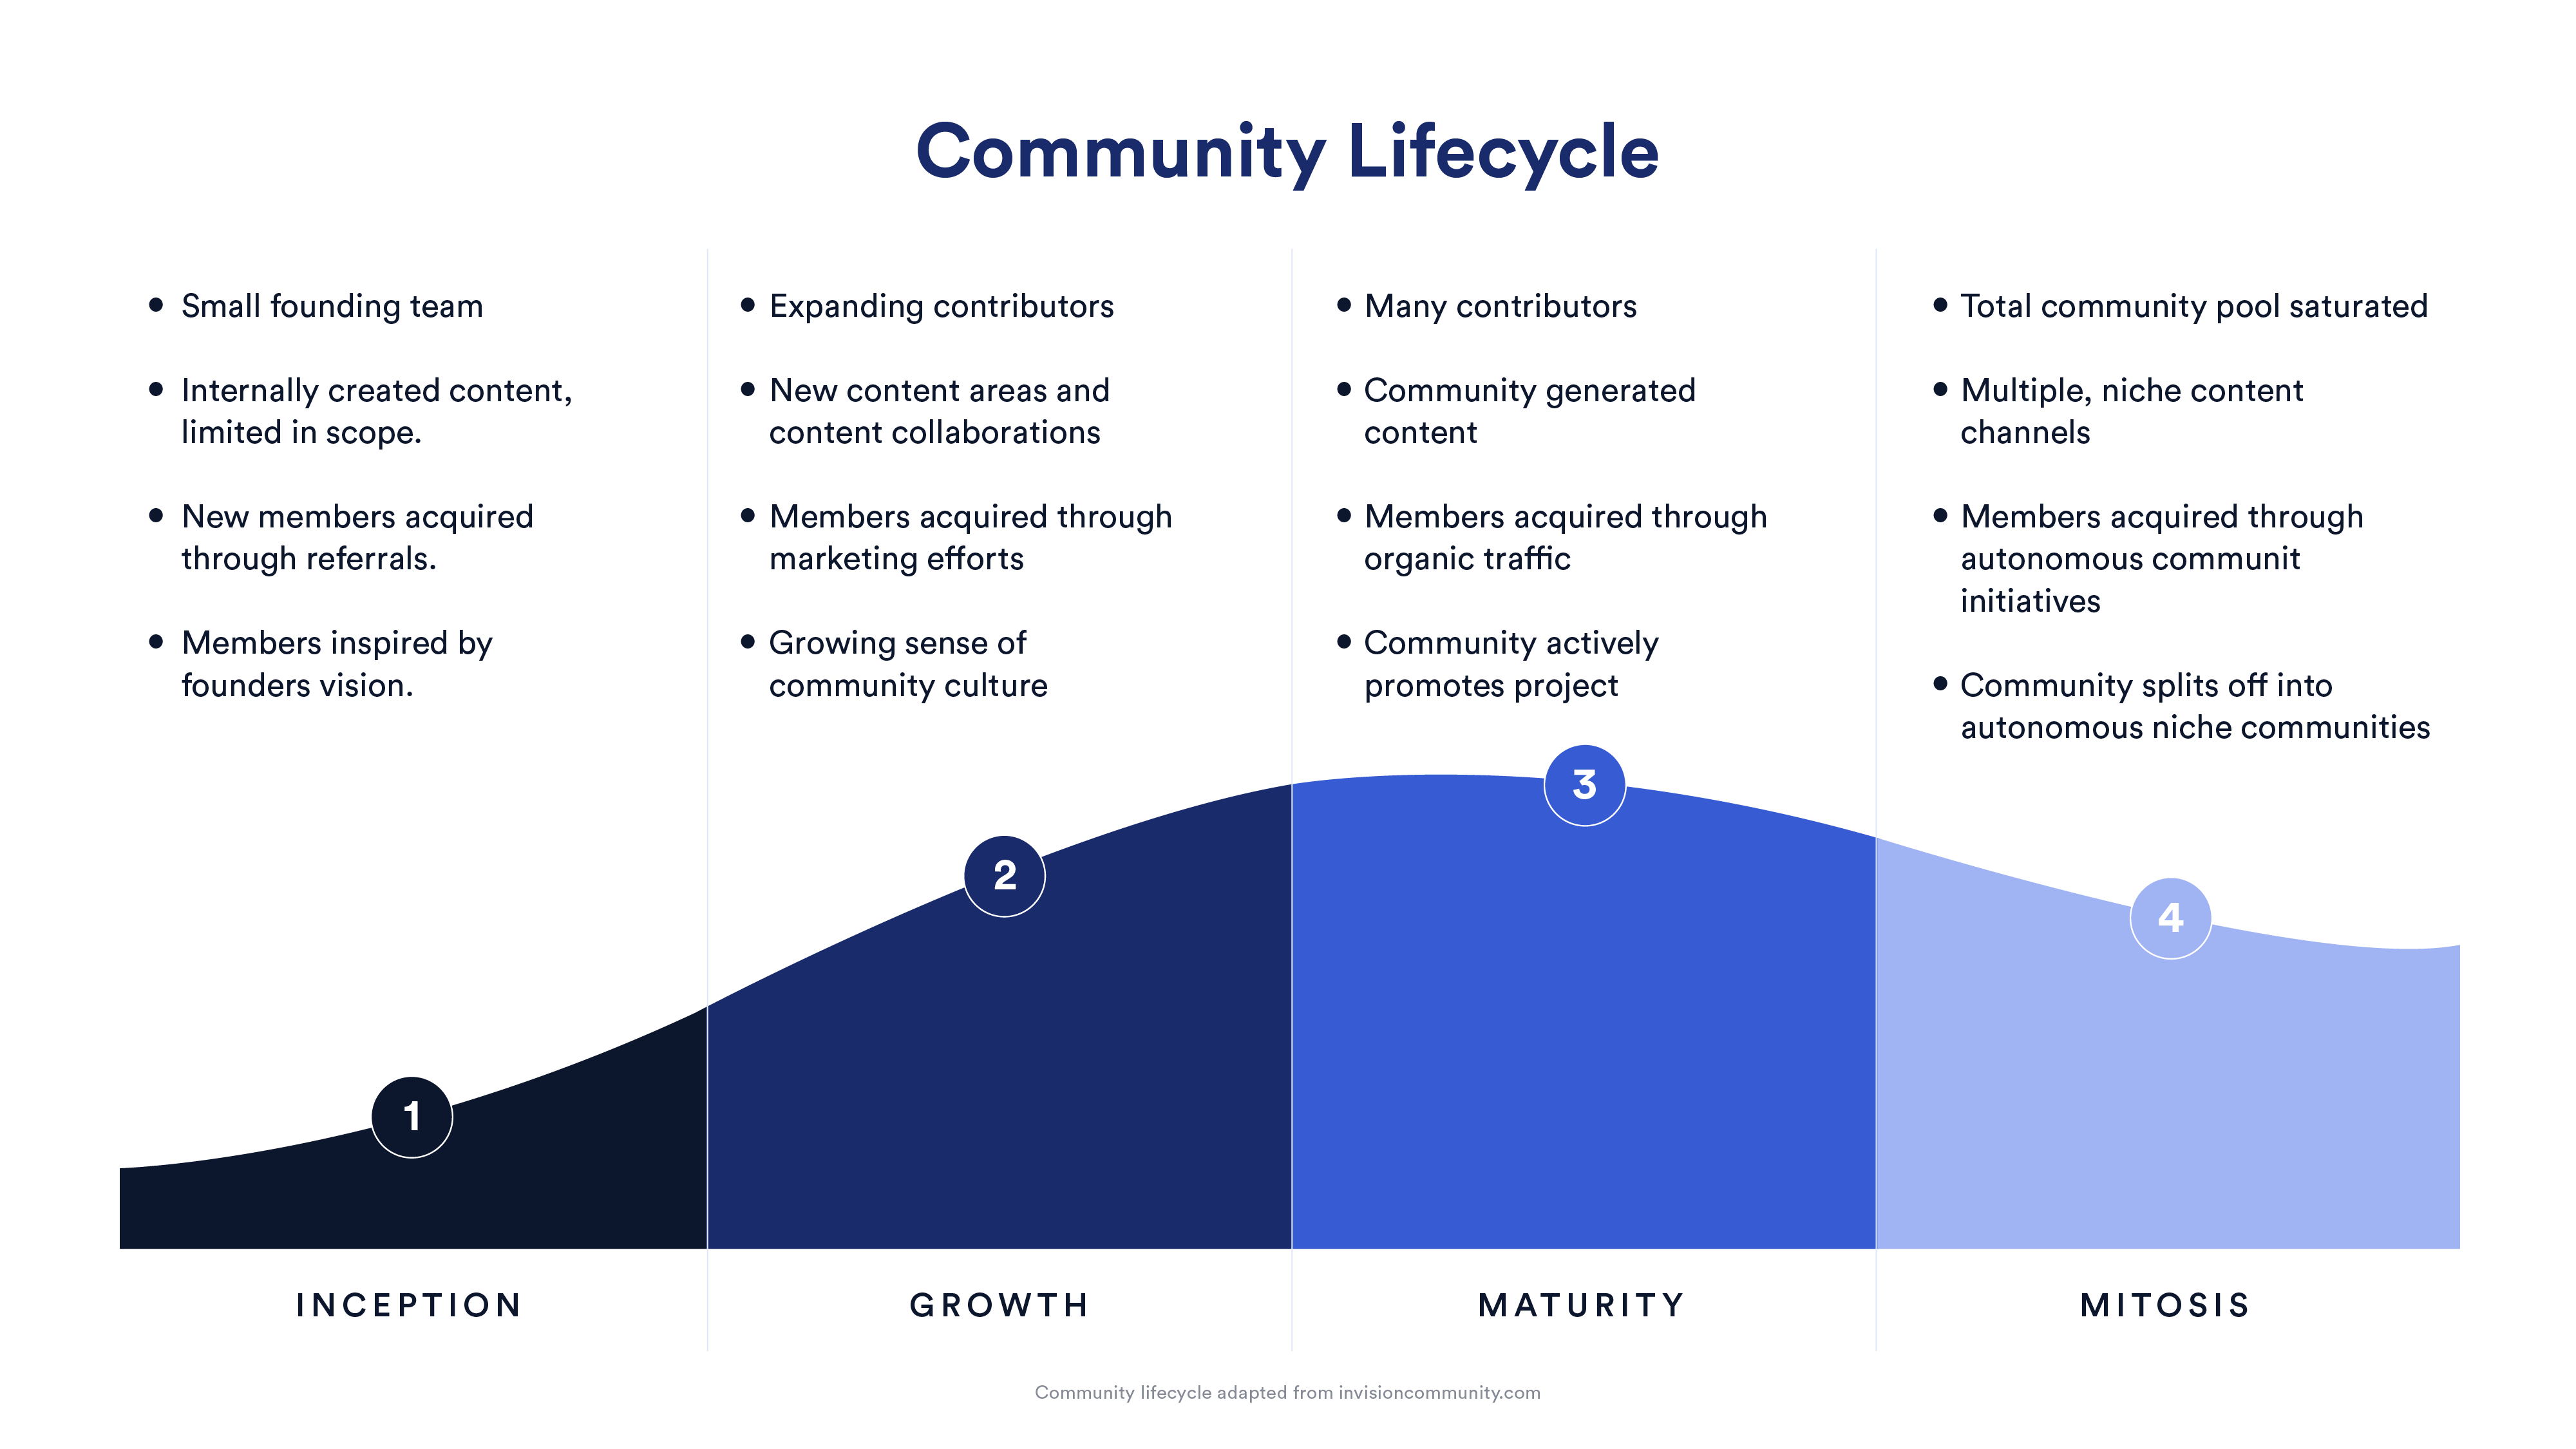 Diagram depicting the Community Lifecycle